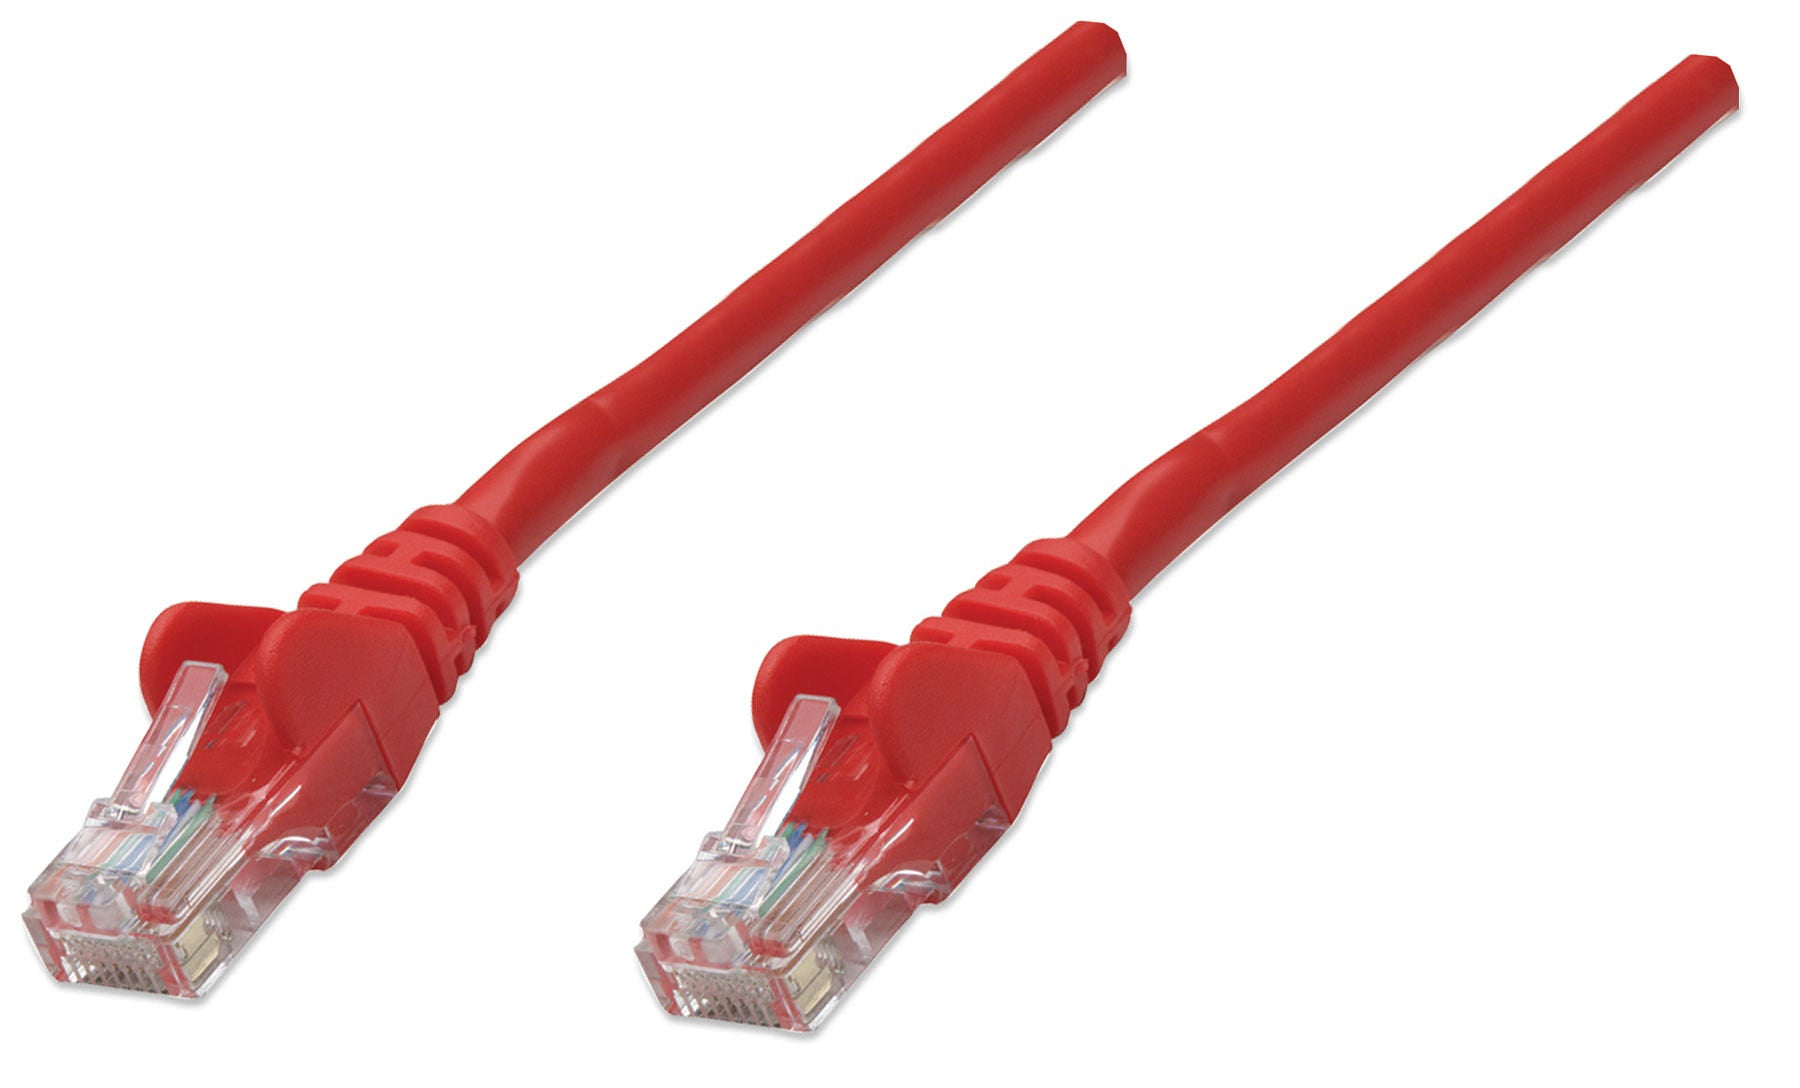 Intellinet Network Patch Cable, Cat6, 5m, Red, CCA, U/UTP, PVC, RJ45, Gold Plated Contacts, Snagless, Booted, Lifetime Warranty, Polybag